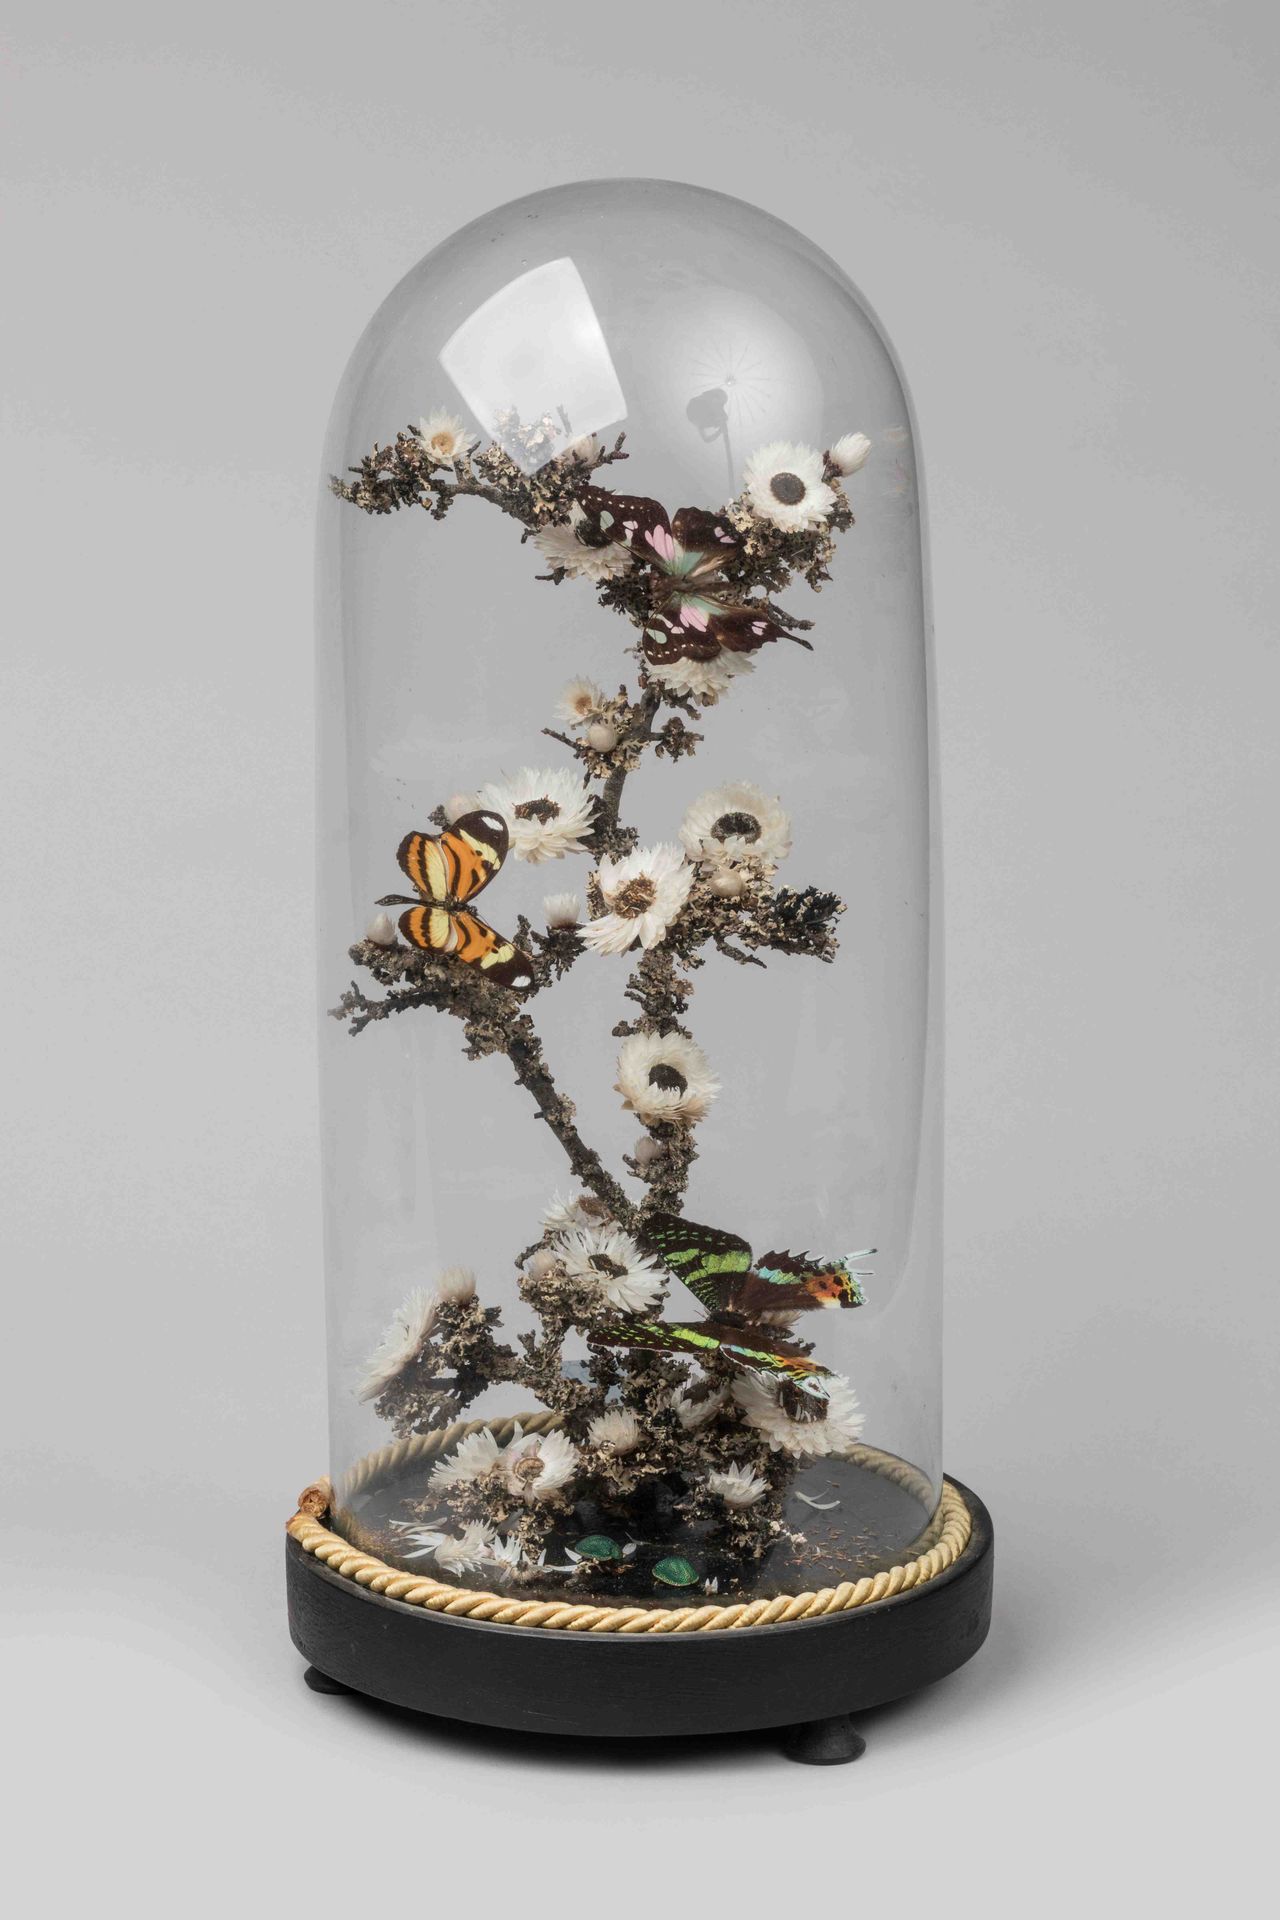 Null DRINK with branching BUTTERFLIES and beetles under glass globe. Circular ba&hellip;